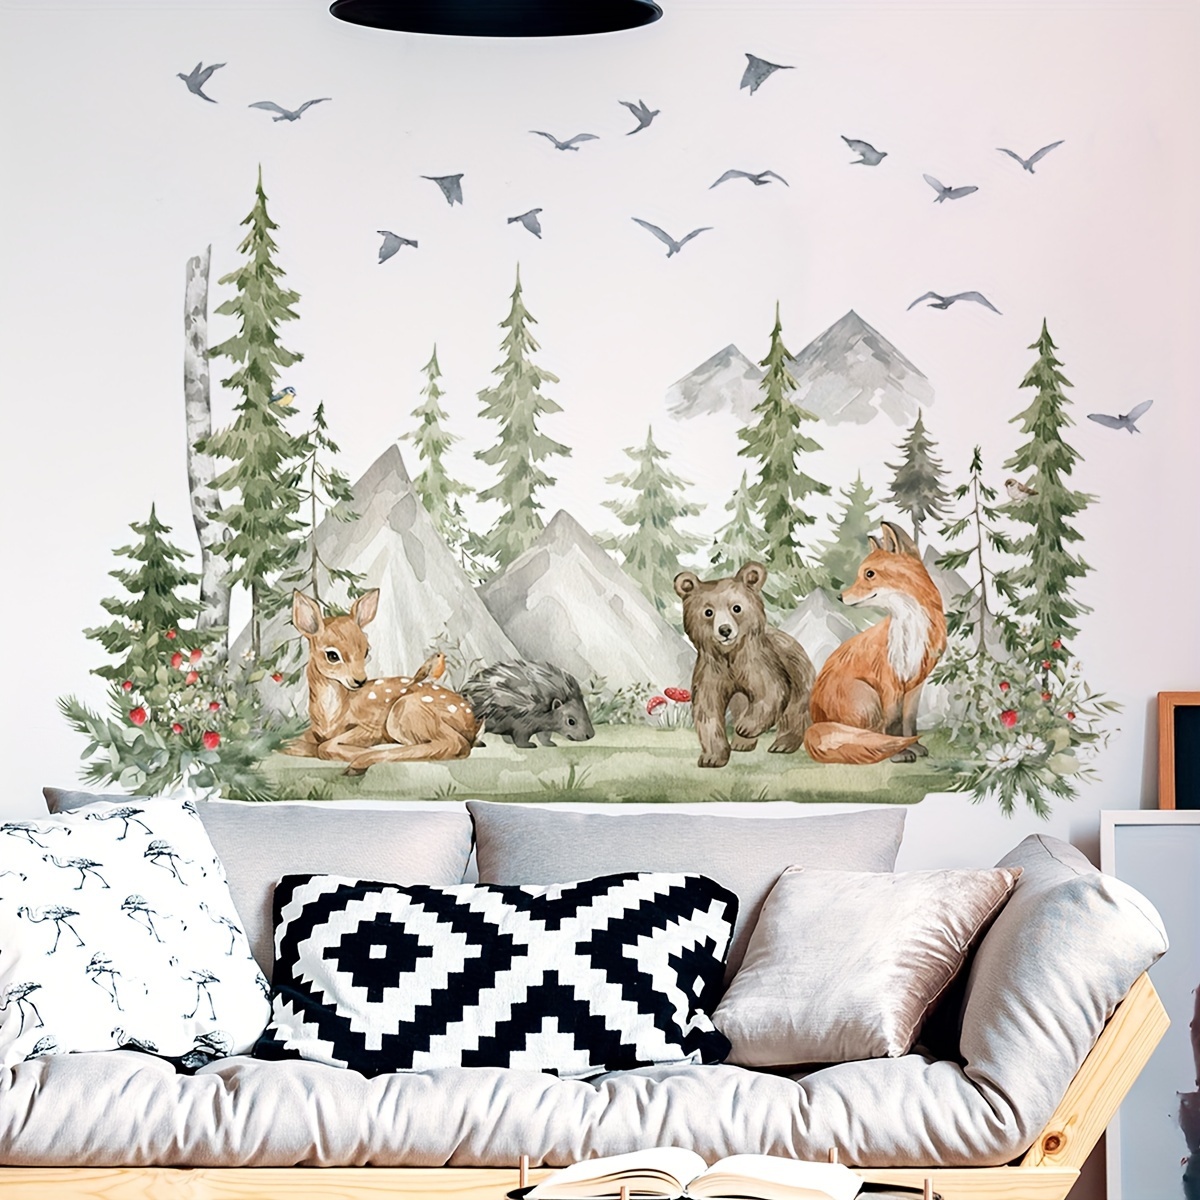 

4pcs Cartoon Animal Wall Stickers, Mountains, Trees Hedgehog Deer Bear Wall Decals Decors, Wall Art Stickers Murals For Room Bedroom Living Room Playroom Sofa Tv Office Wall Decoration